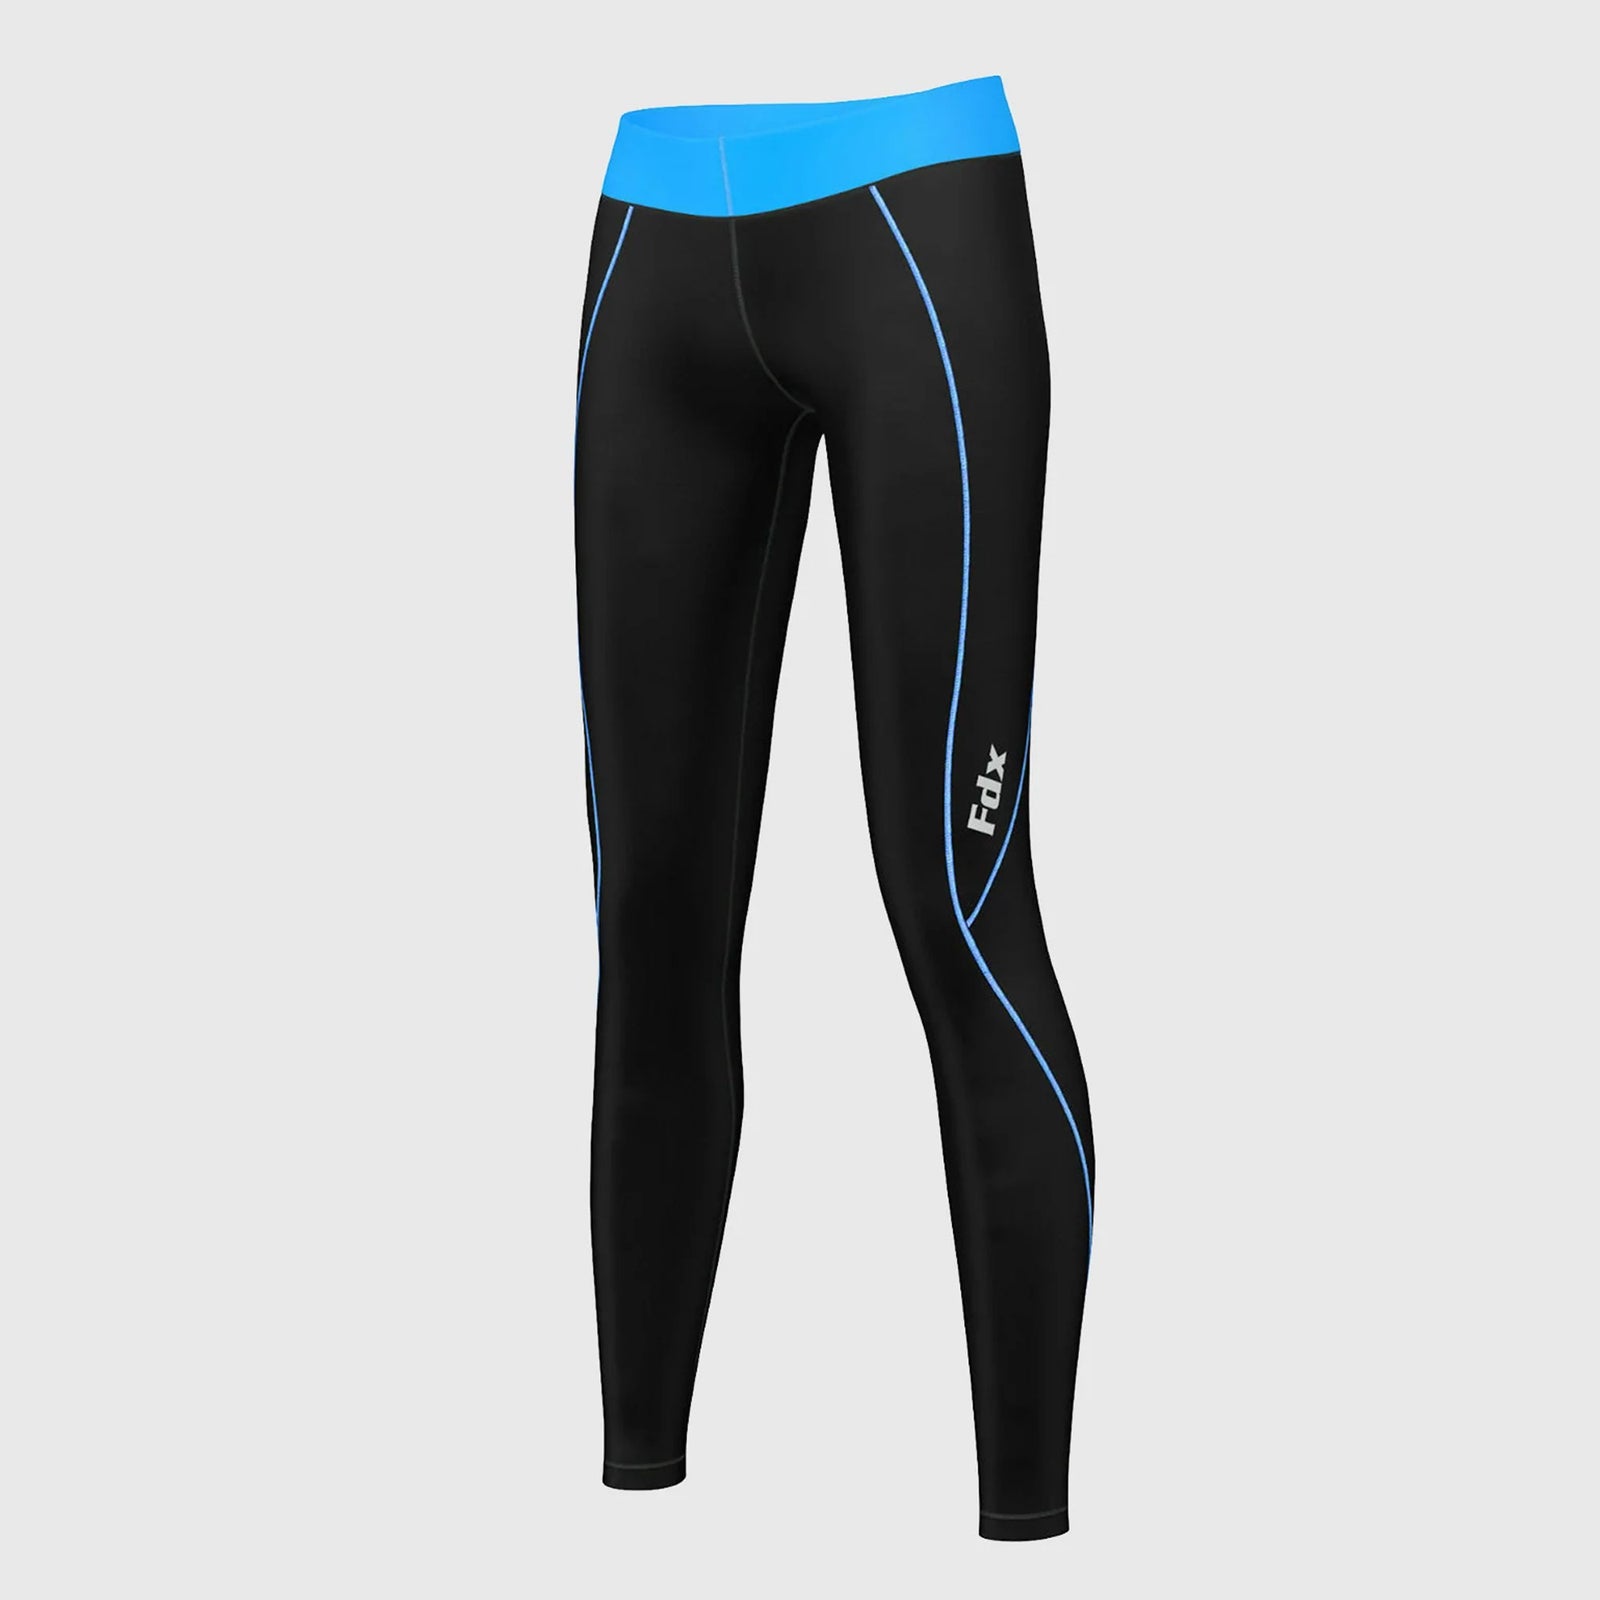 Full Length Compression Tights - Explore the exclusive sportswear  collection at Acteev Wear